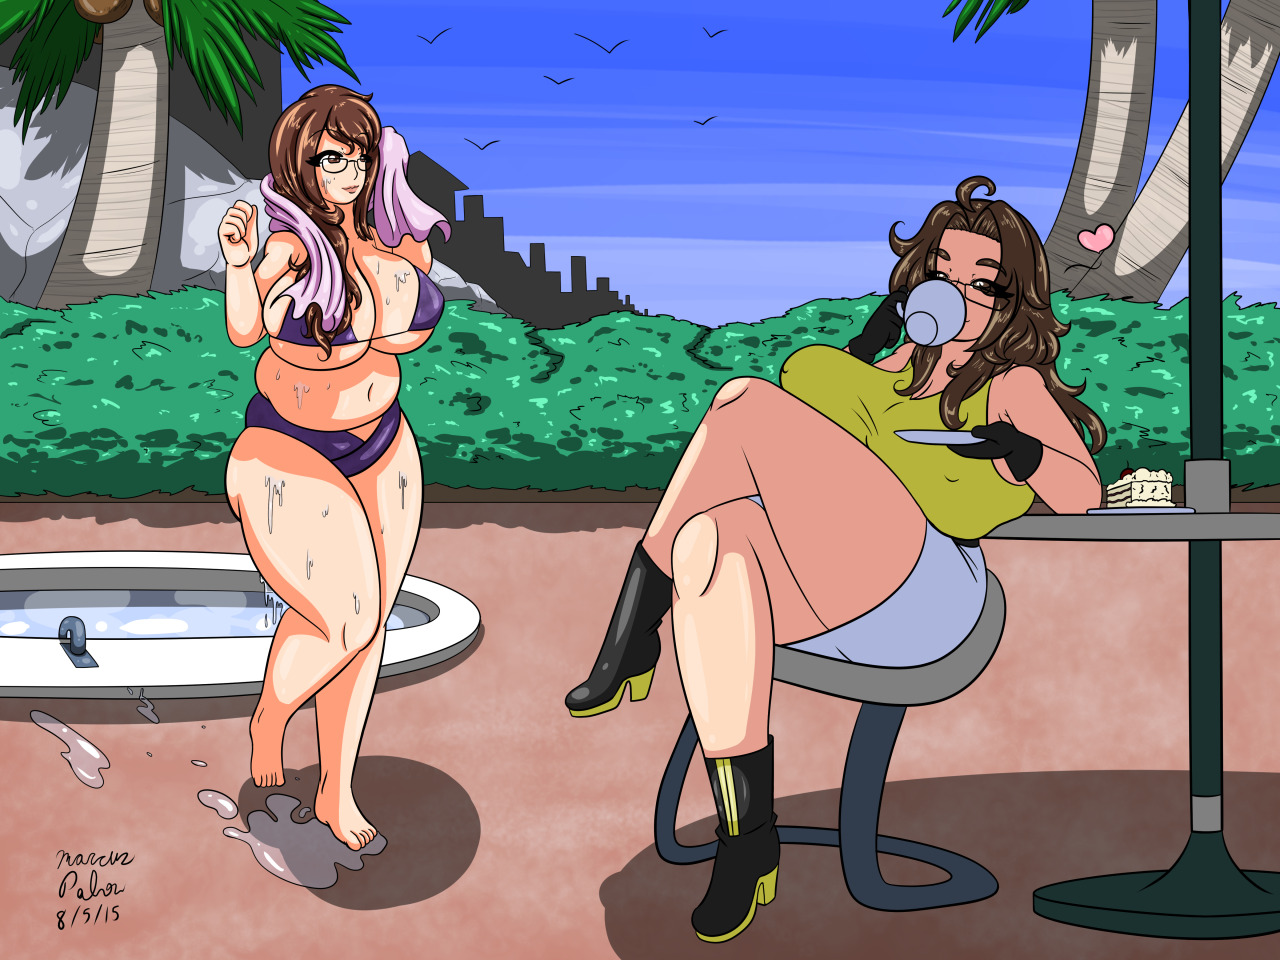 anubis2pabon288:  Here’s a gift for Agawa, featuring his gals Jyazue and Ayumu